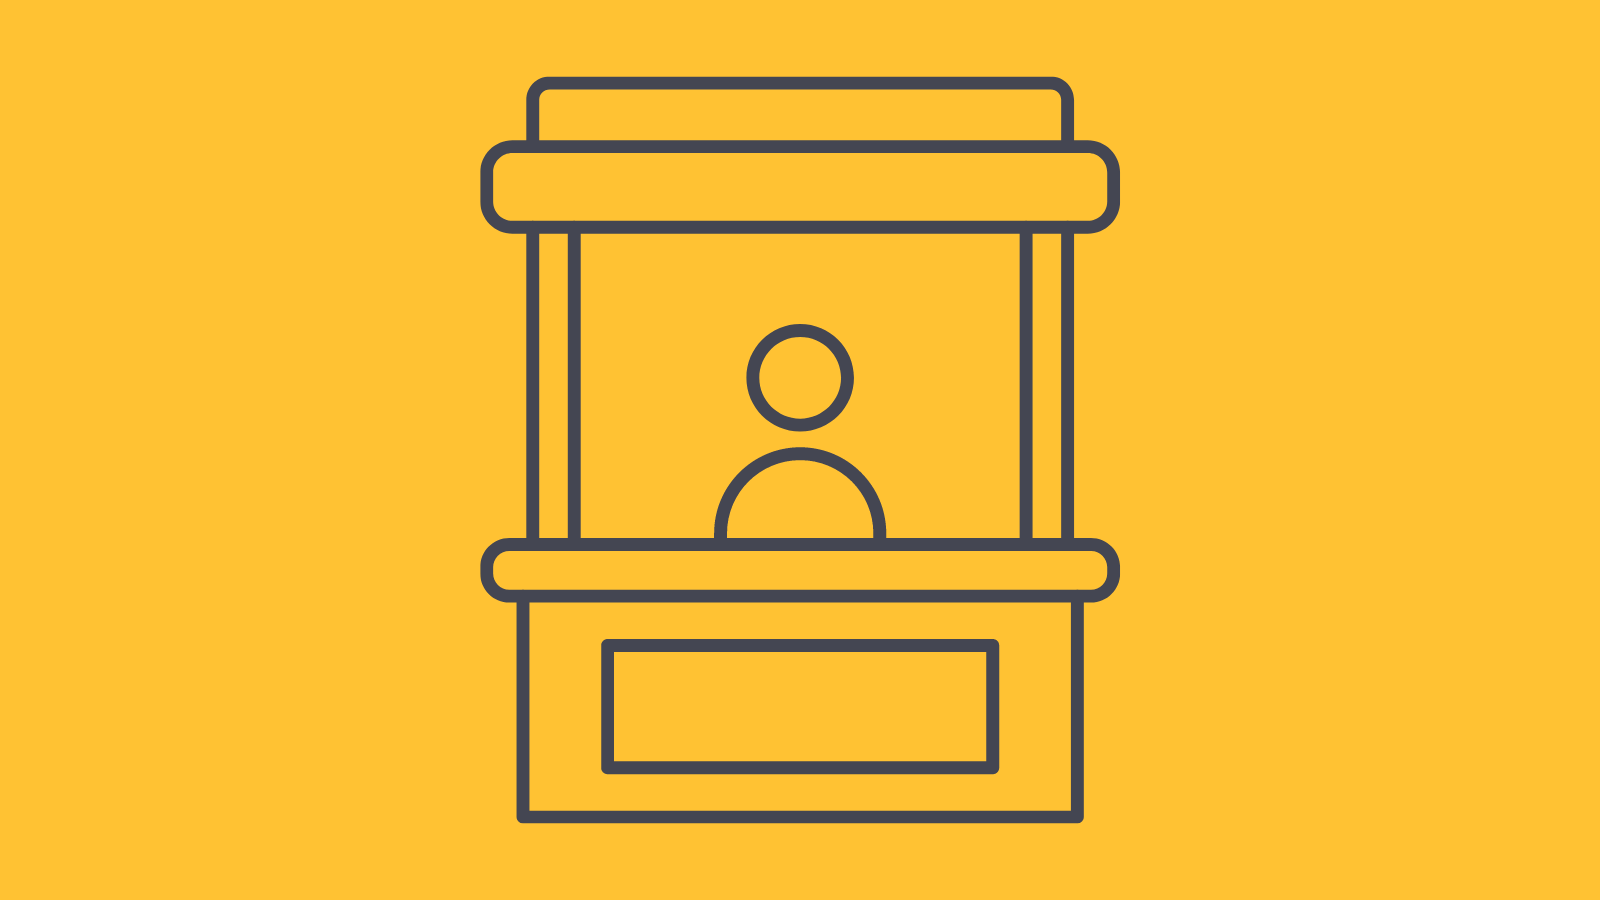 A minimal graphic of a person standing in a vendor booth